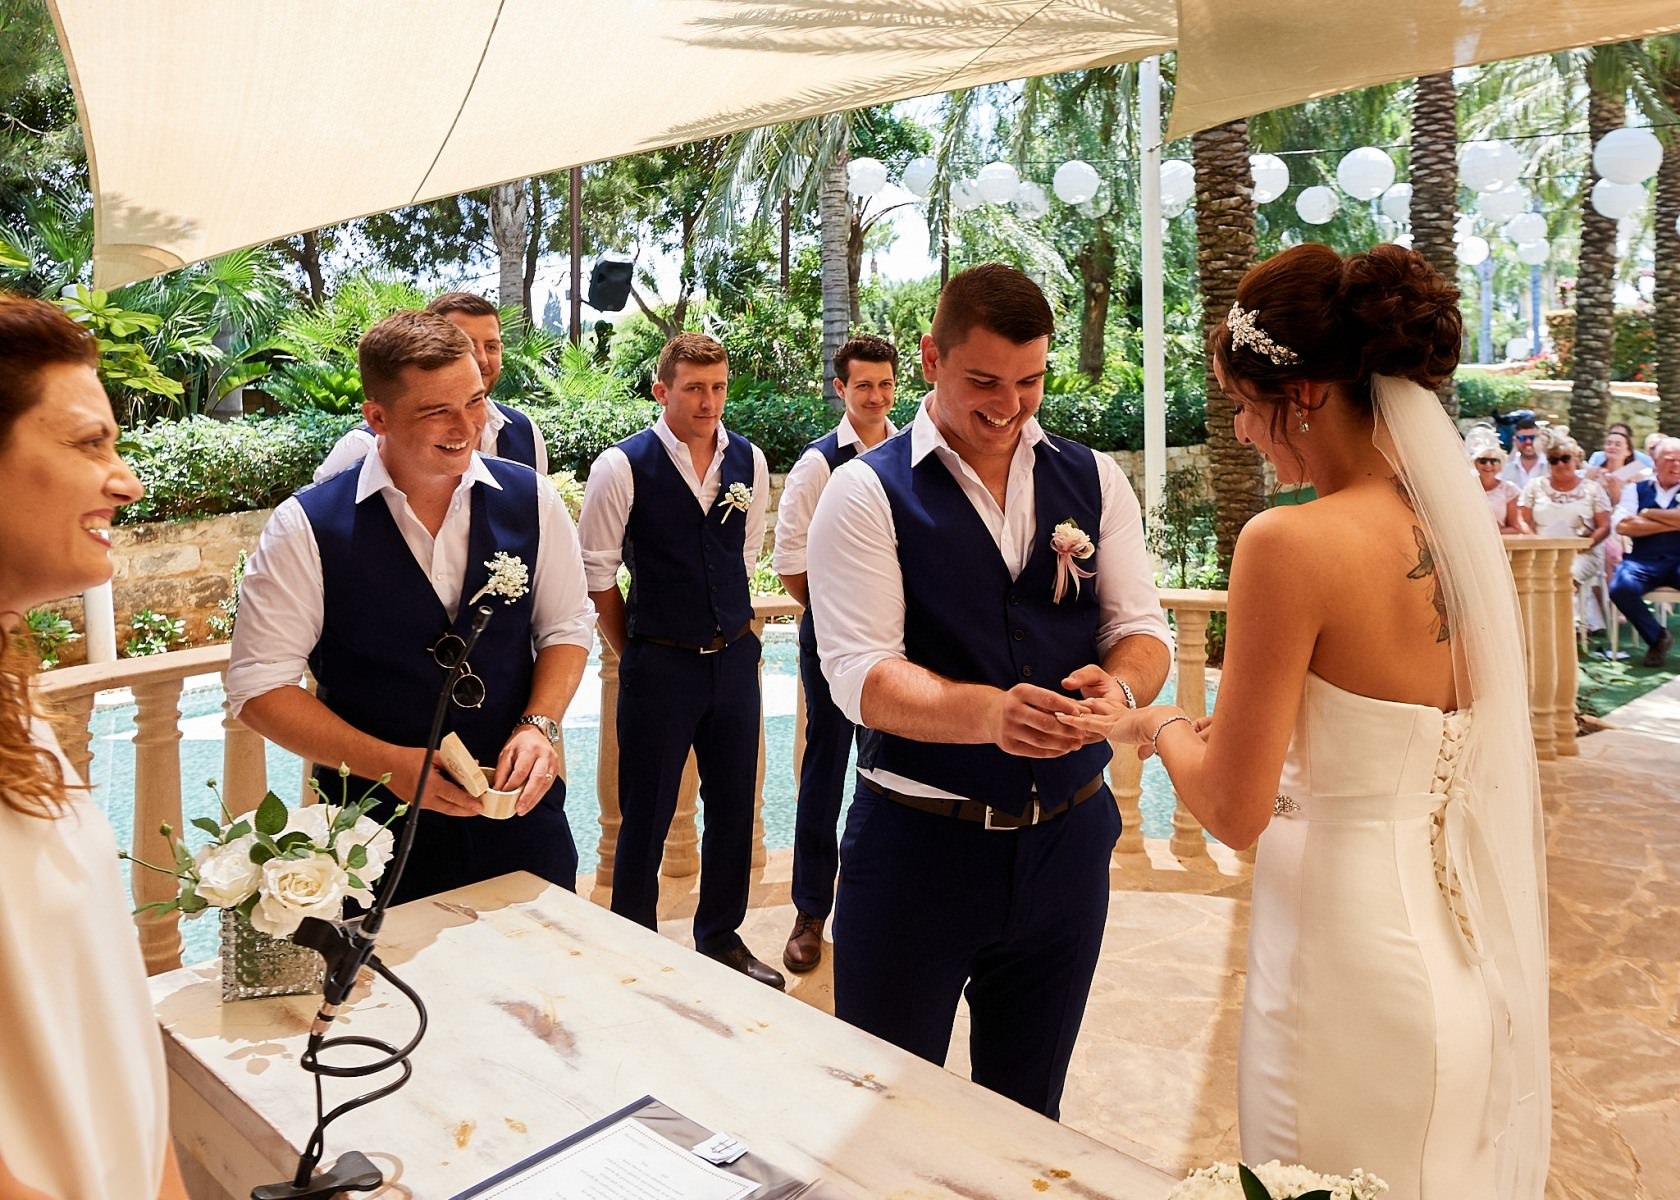 Photograph from the wedding of Shauna and Bradley at the Olympic Lagoon Resort in Ayia Napa